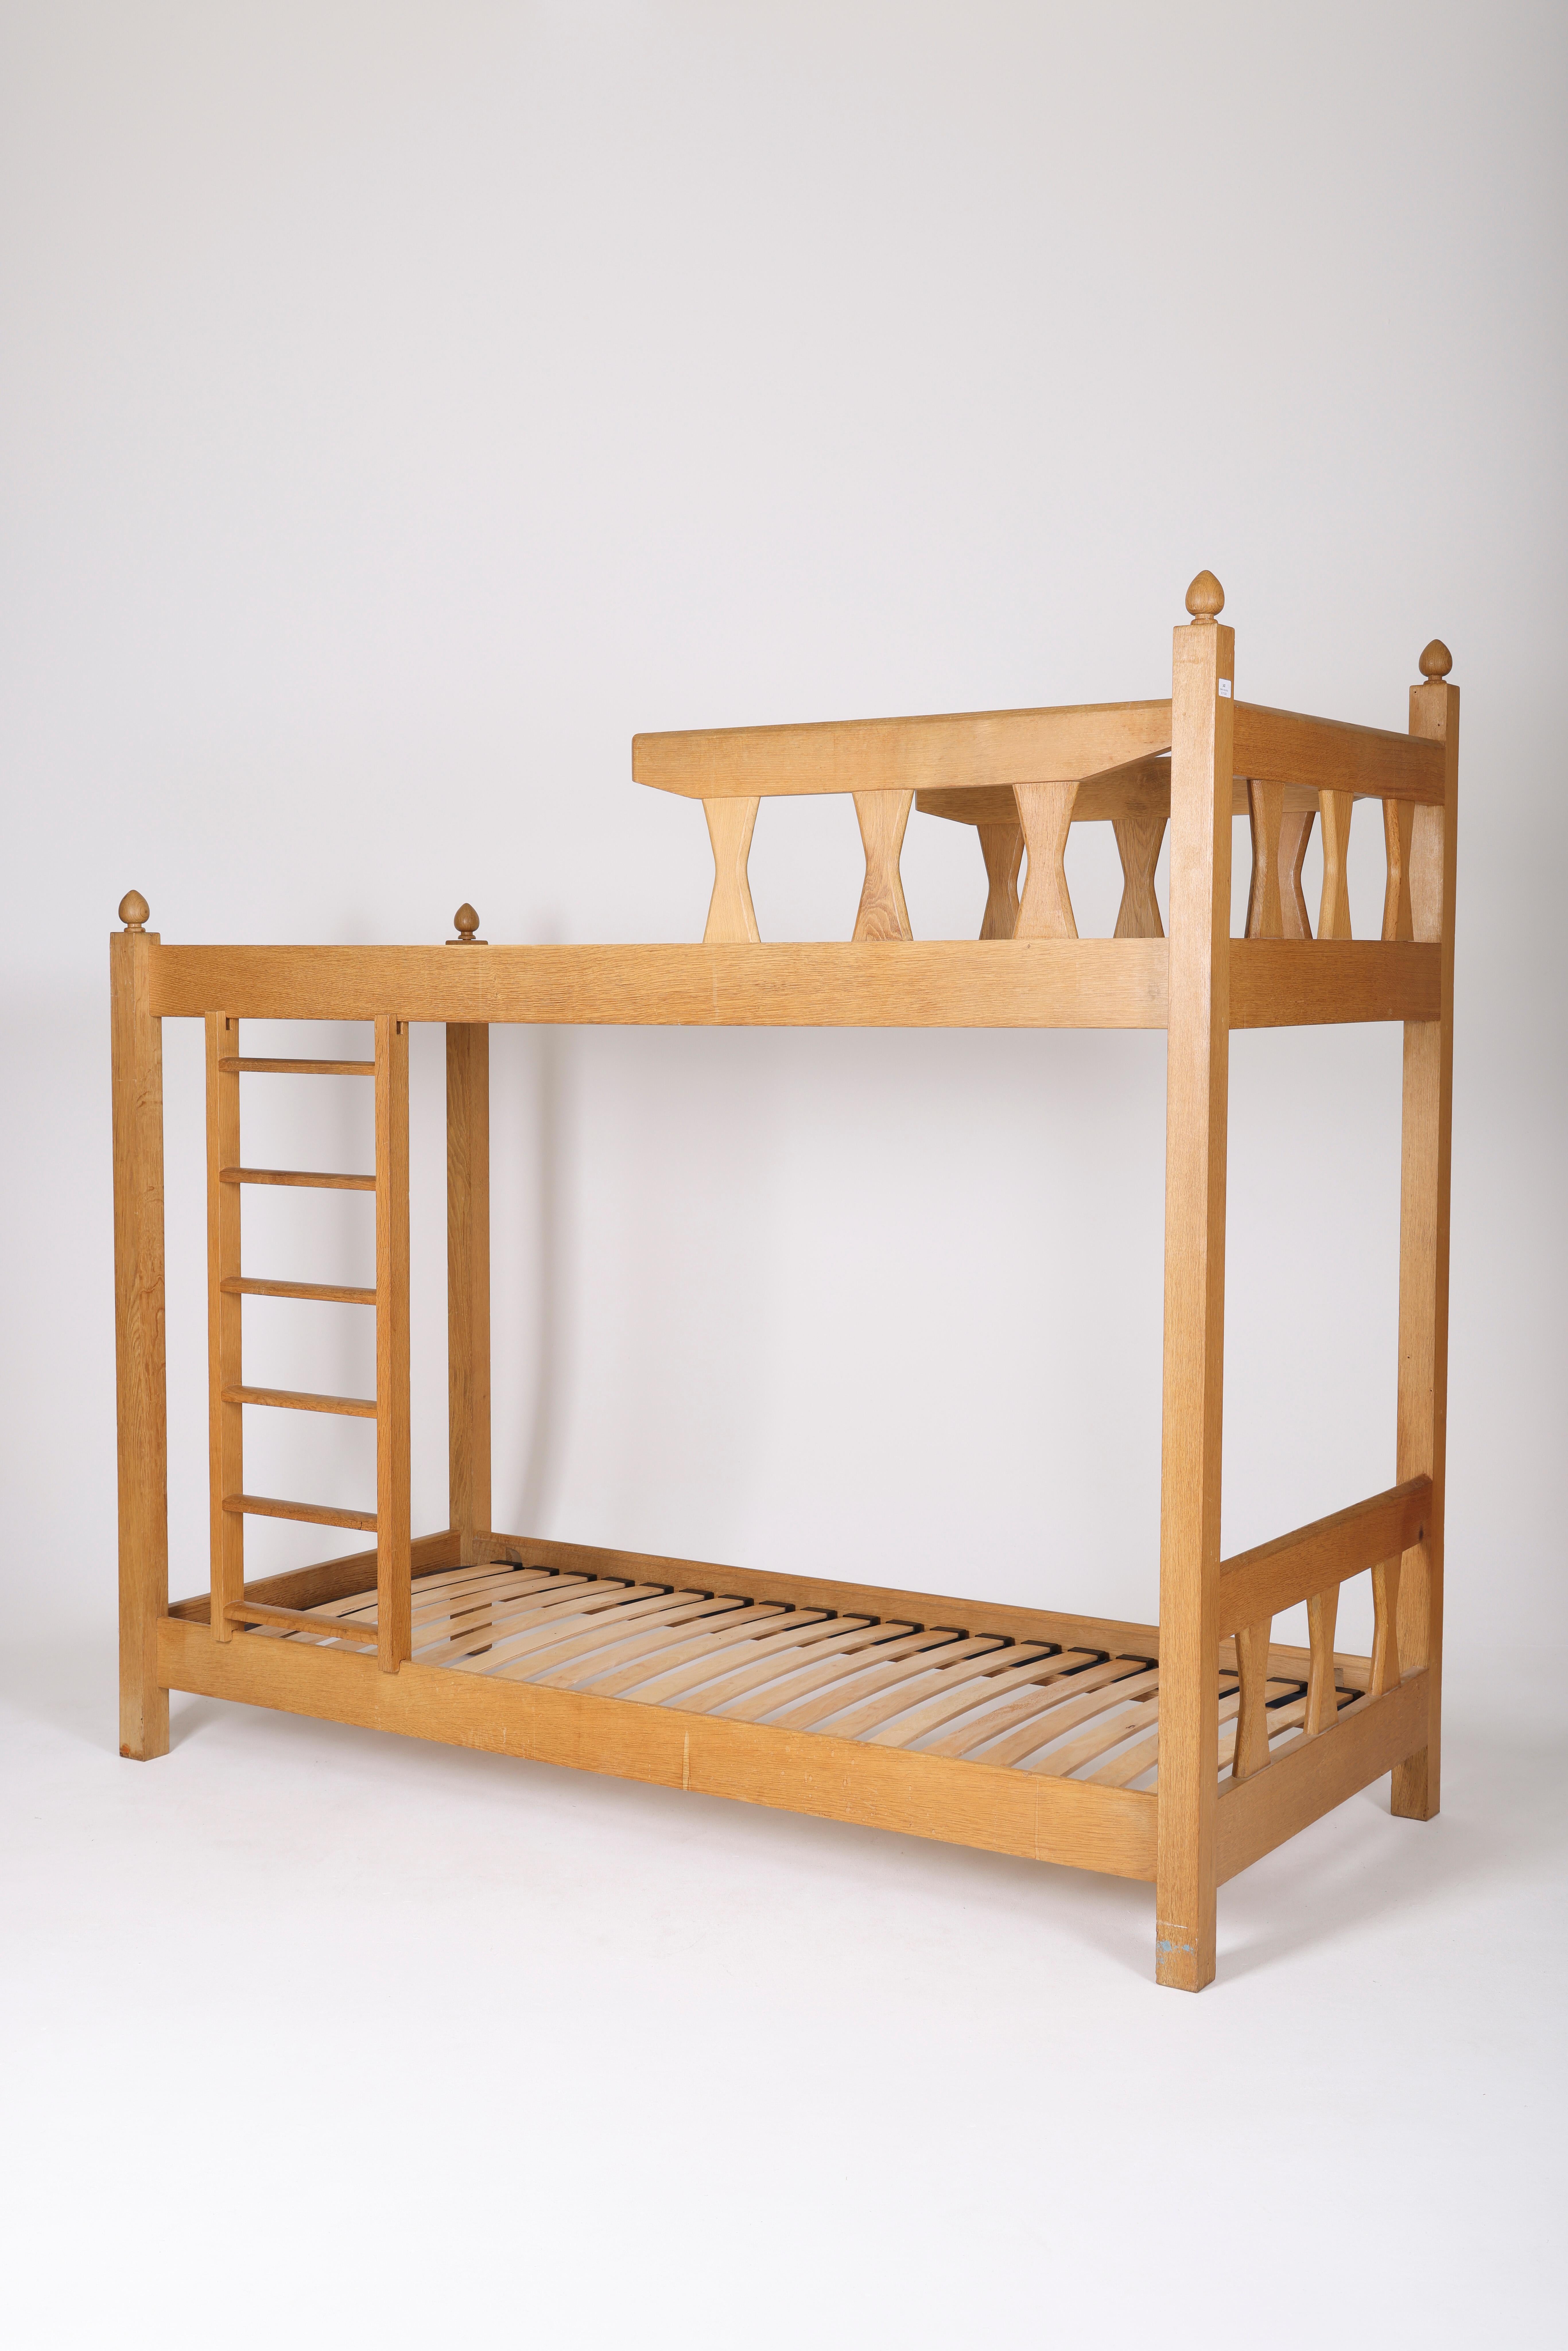 Bunk bed in solid oak by Guillerme and Chambron for Votre Maison. Two single beds stacked, with a perforated panel at the headboard and a movable ladder. Very good condition.
LP700-701